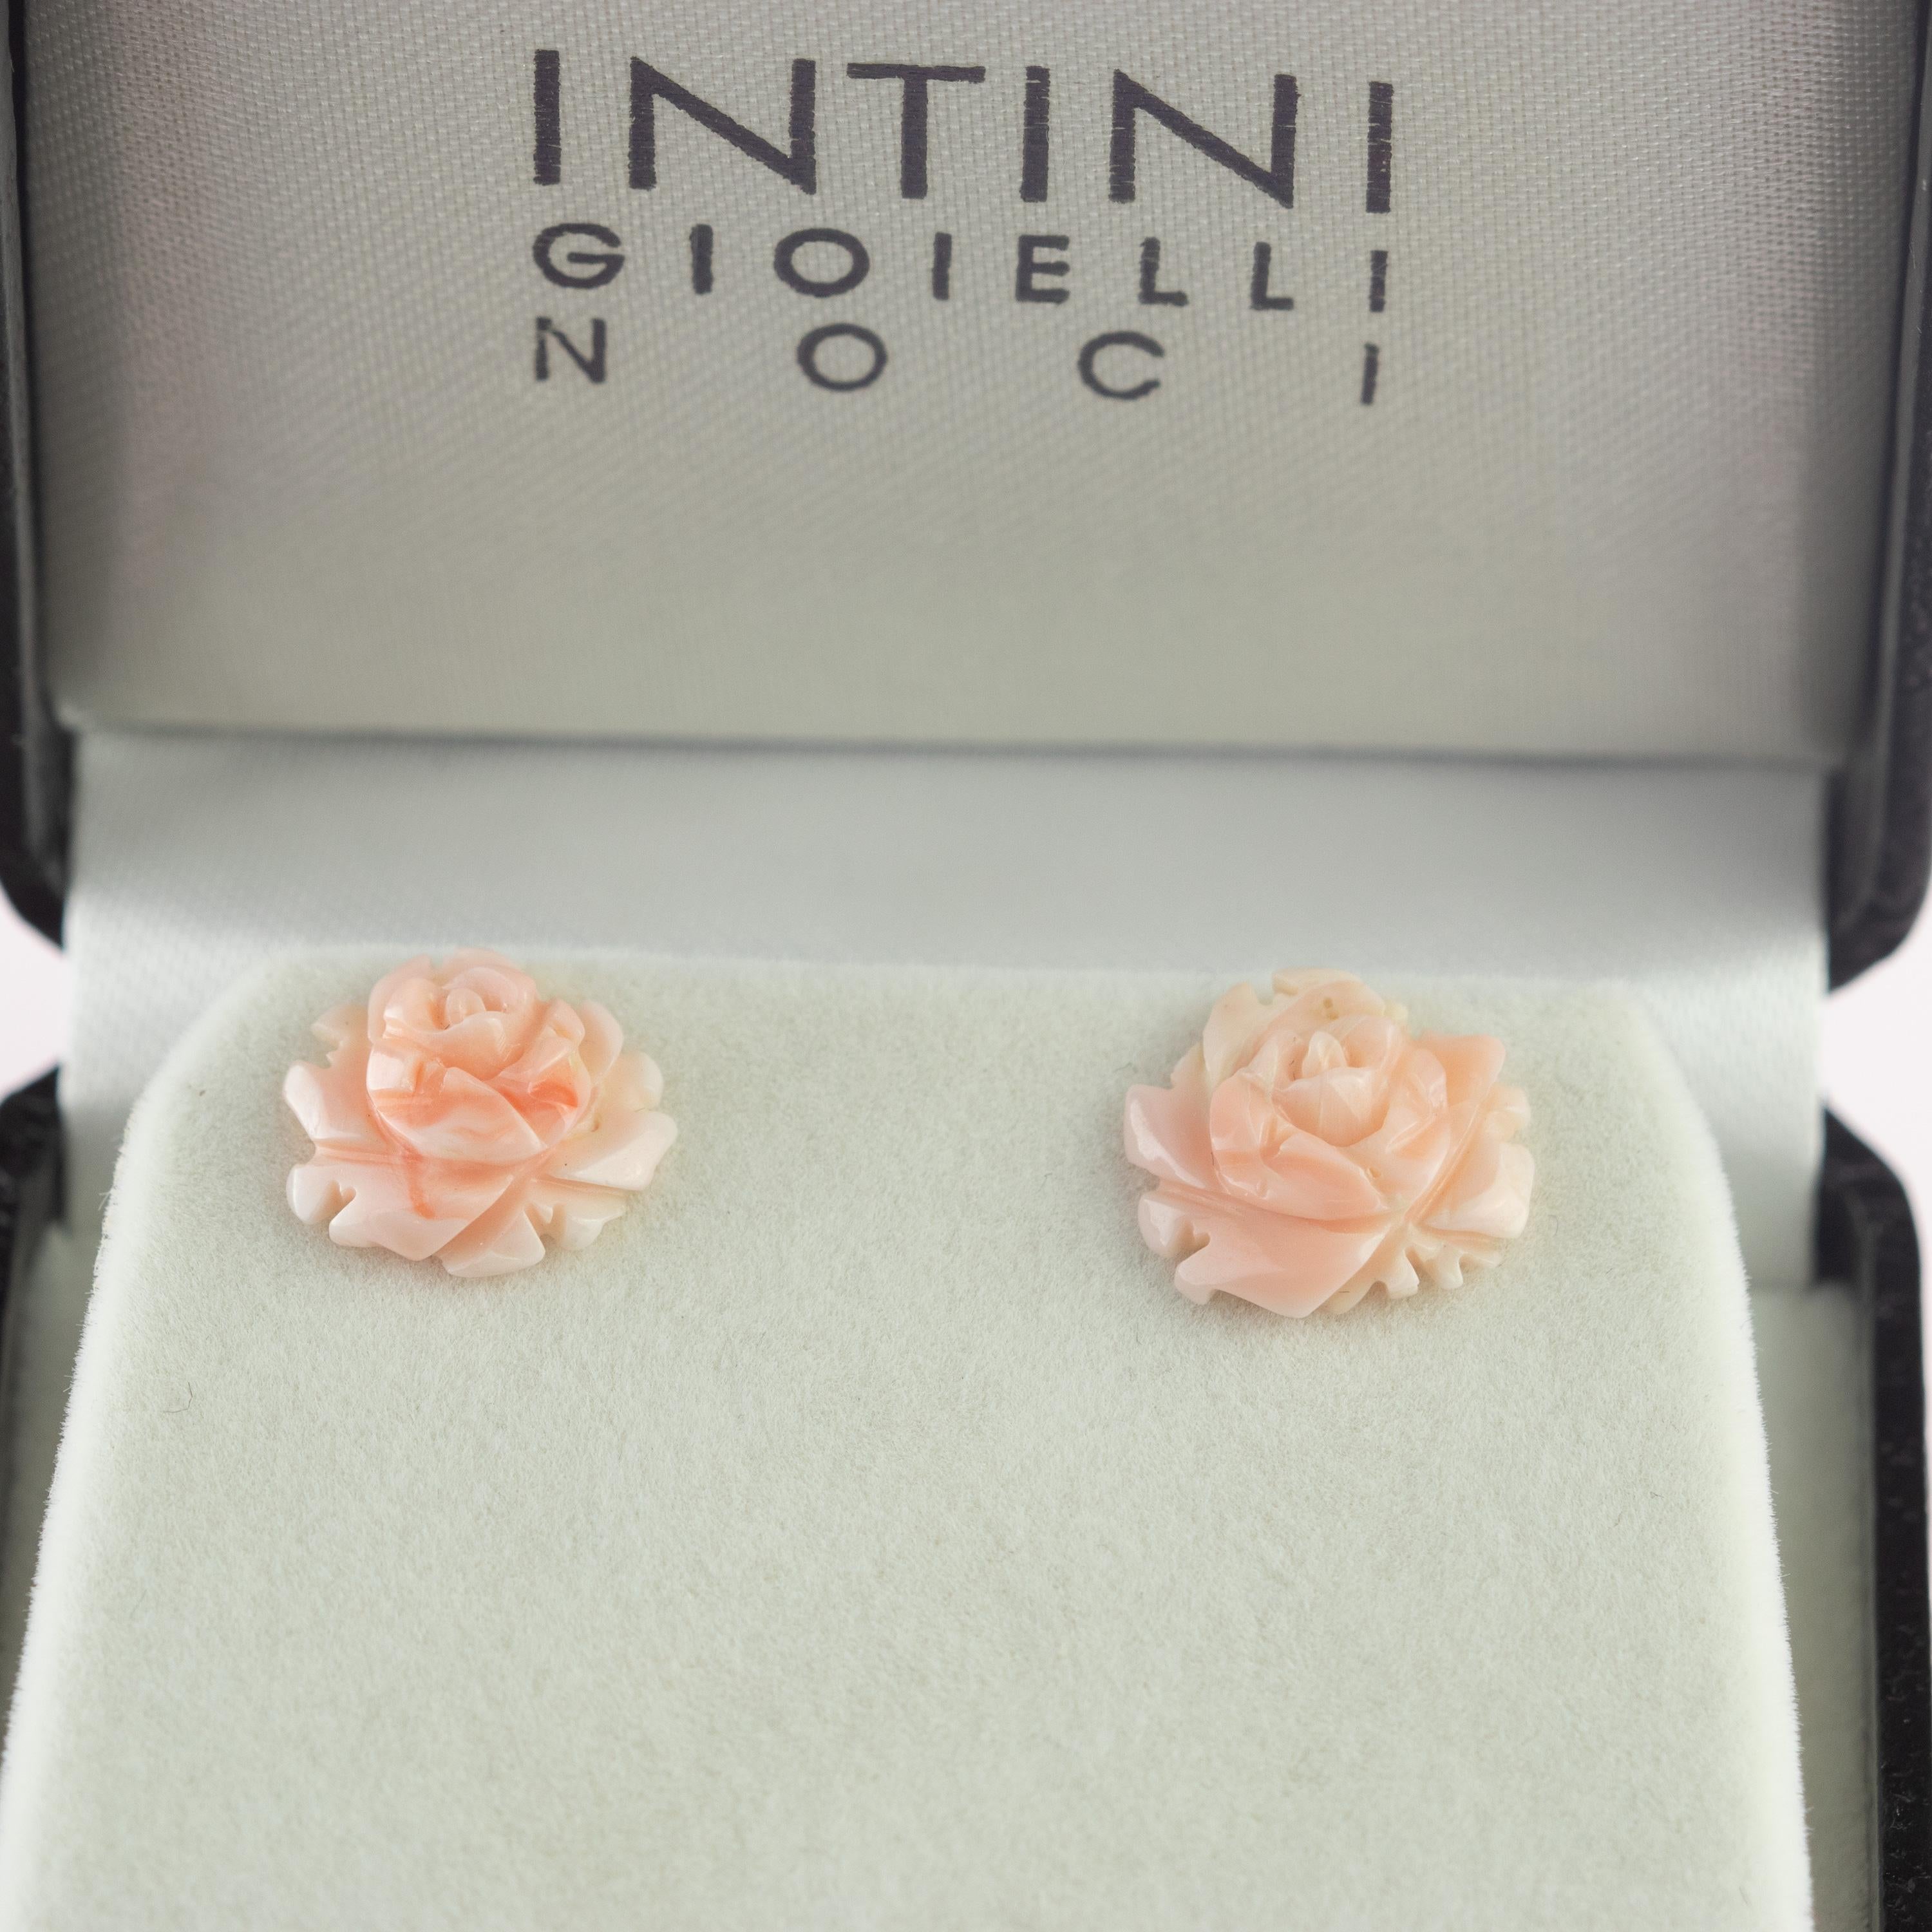 Astonishing and sweet pink rose earrings. Natural coral carved petals that evoke the italian handmade traditional crafted jewelry work. Unique rose carvings in top quality coral for a signature INTINI Jewels look. Elegant and contemporary stud